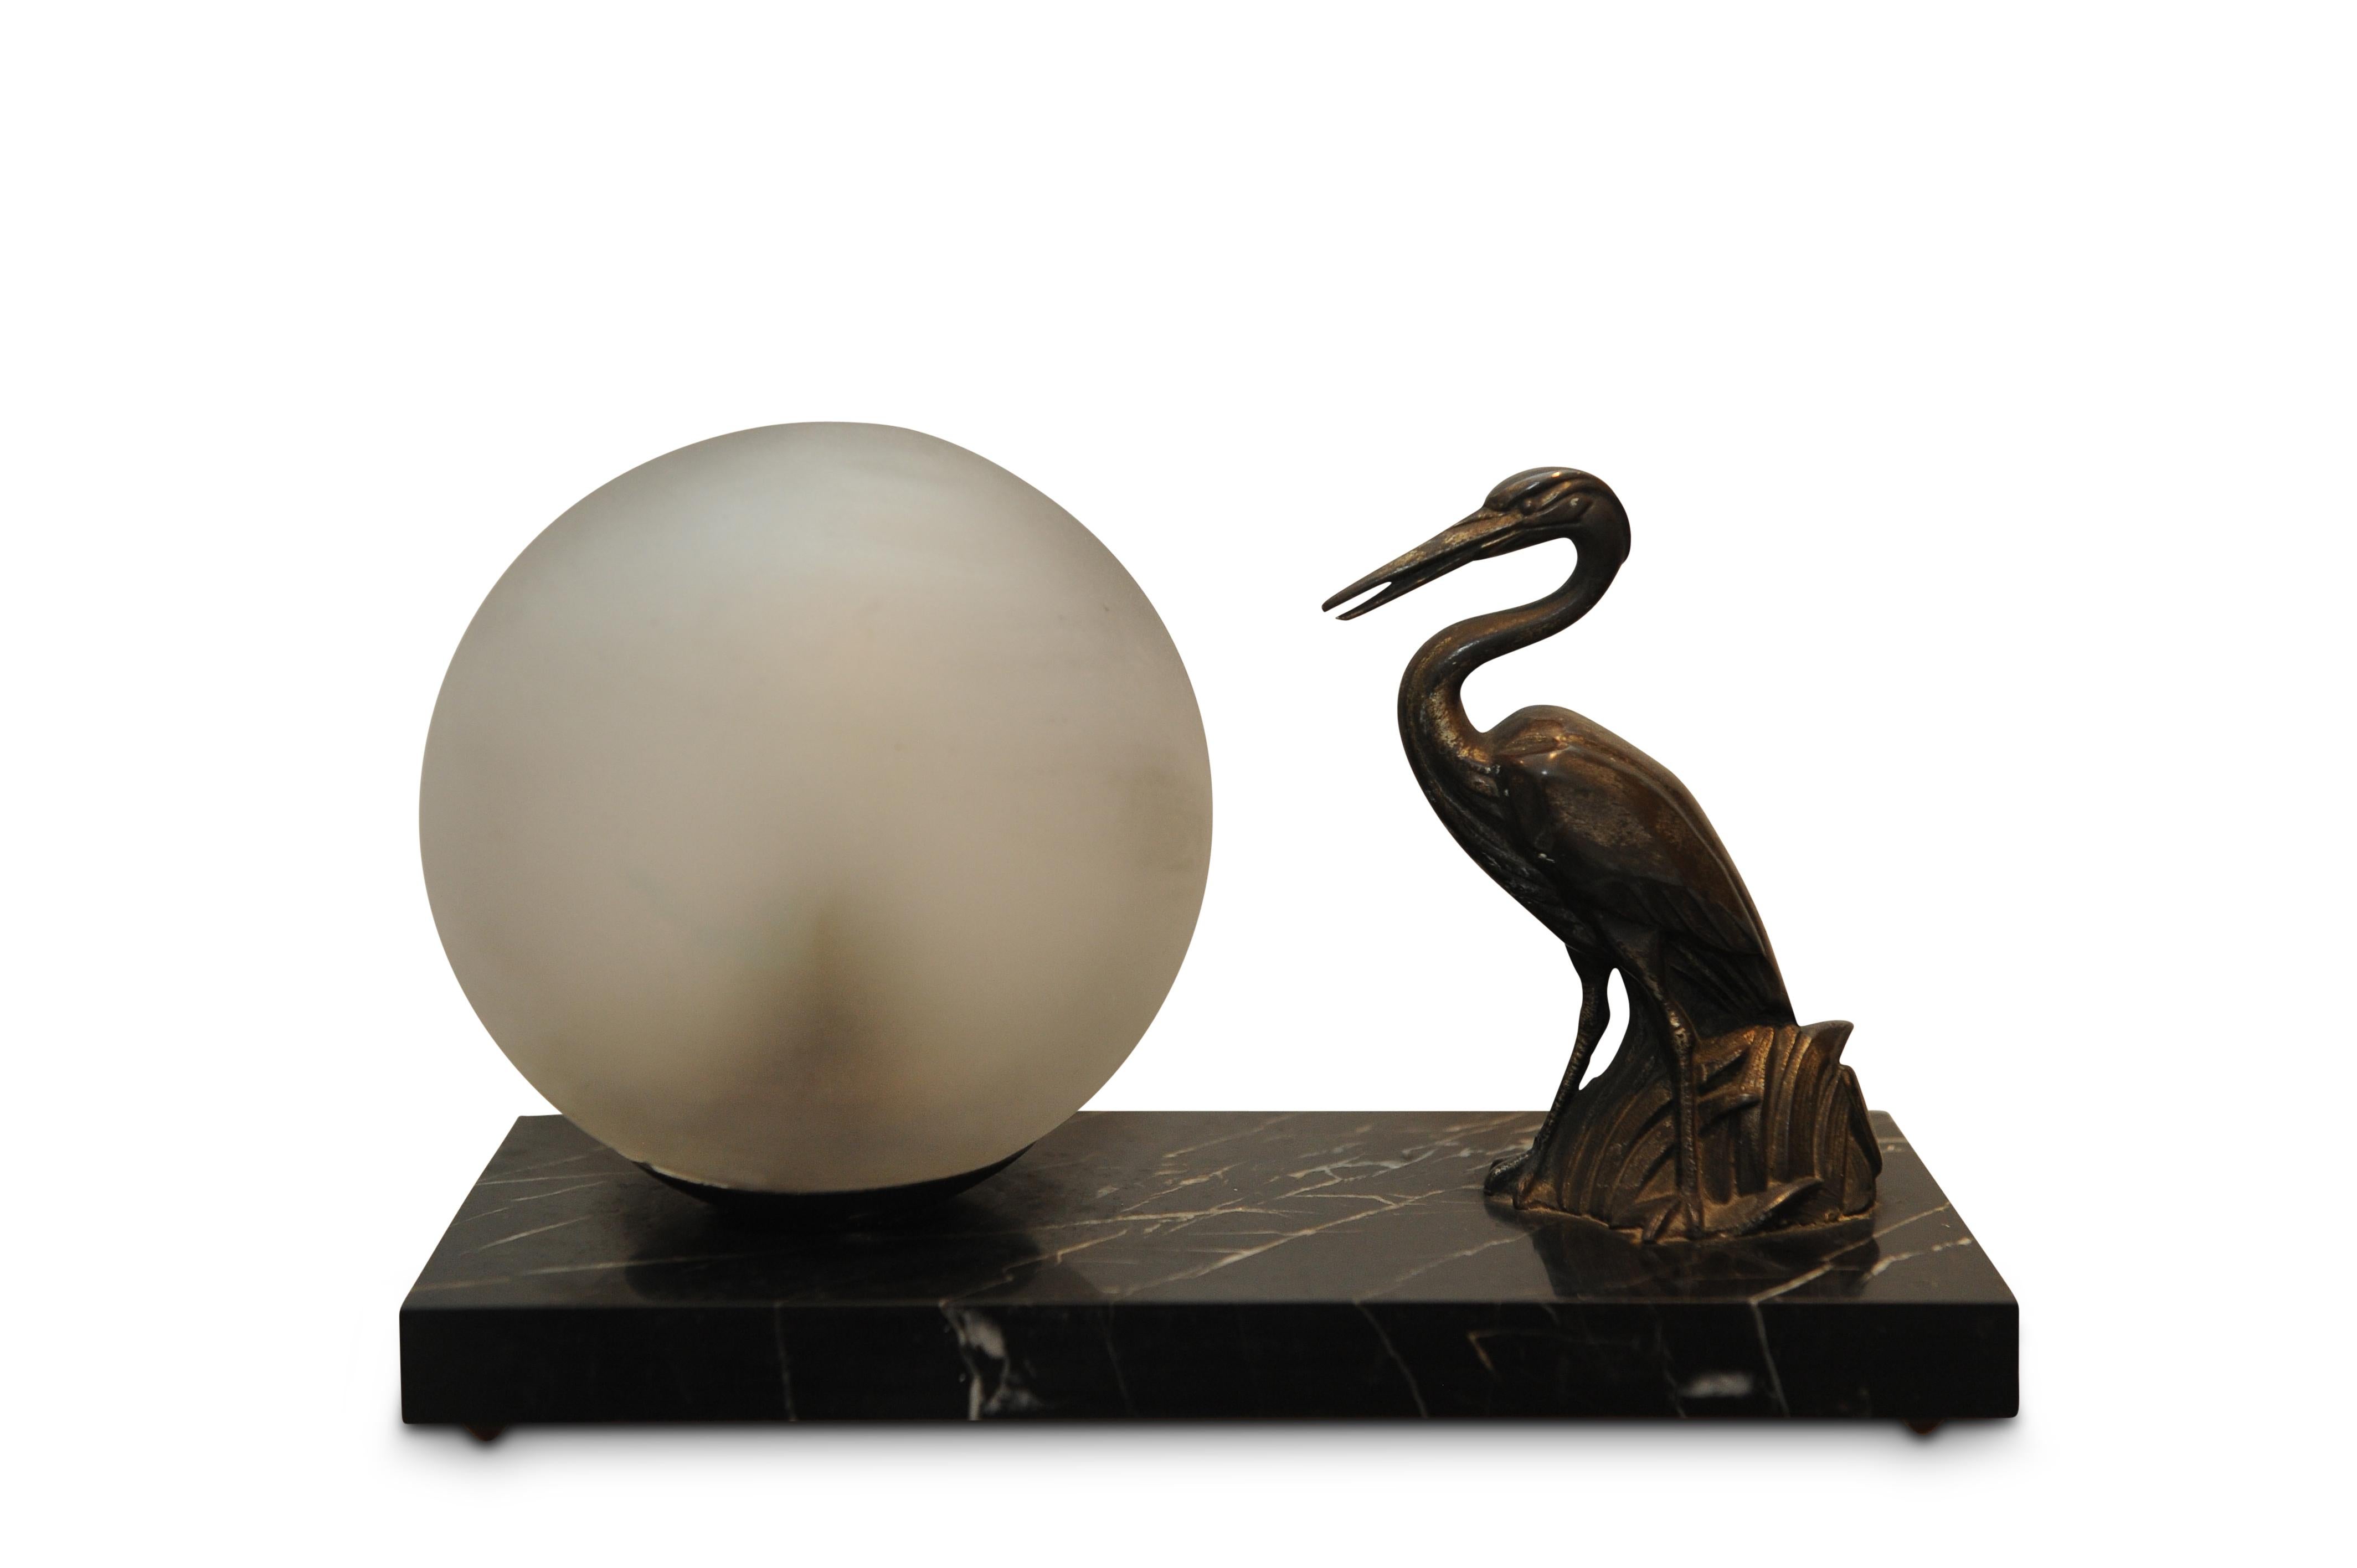 European 1930s Art Deco Table Lamp Spelter Sculpture of a Heron, a Glass Globe on Marble For Sale